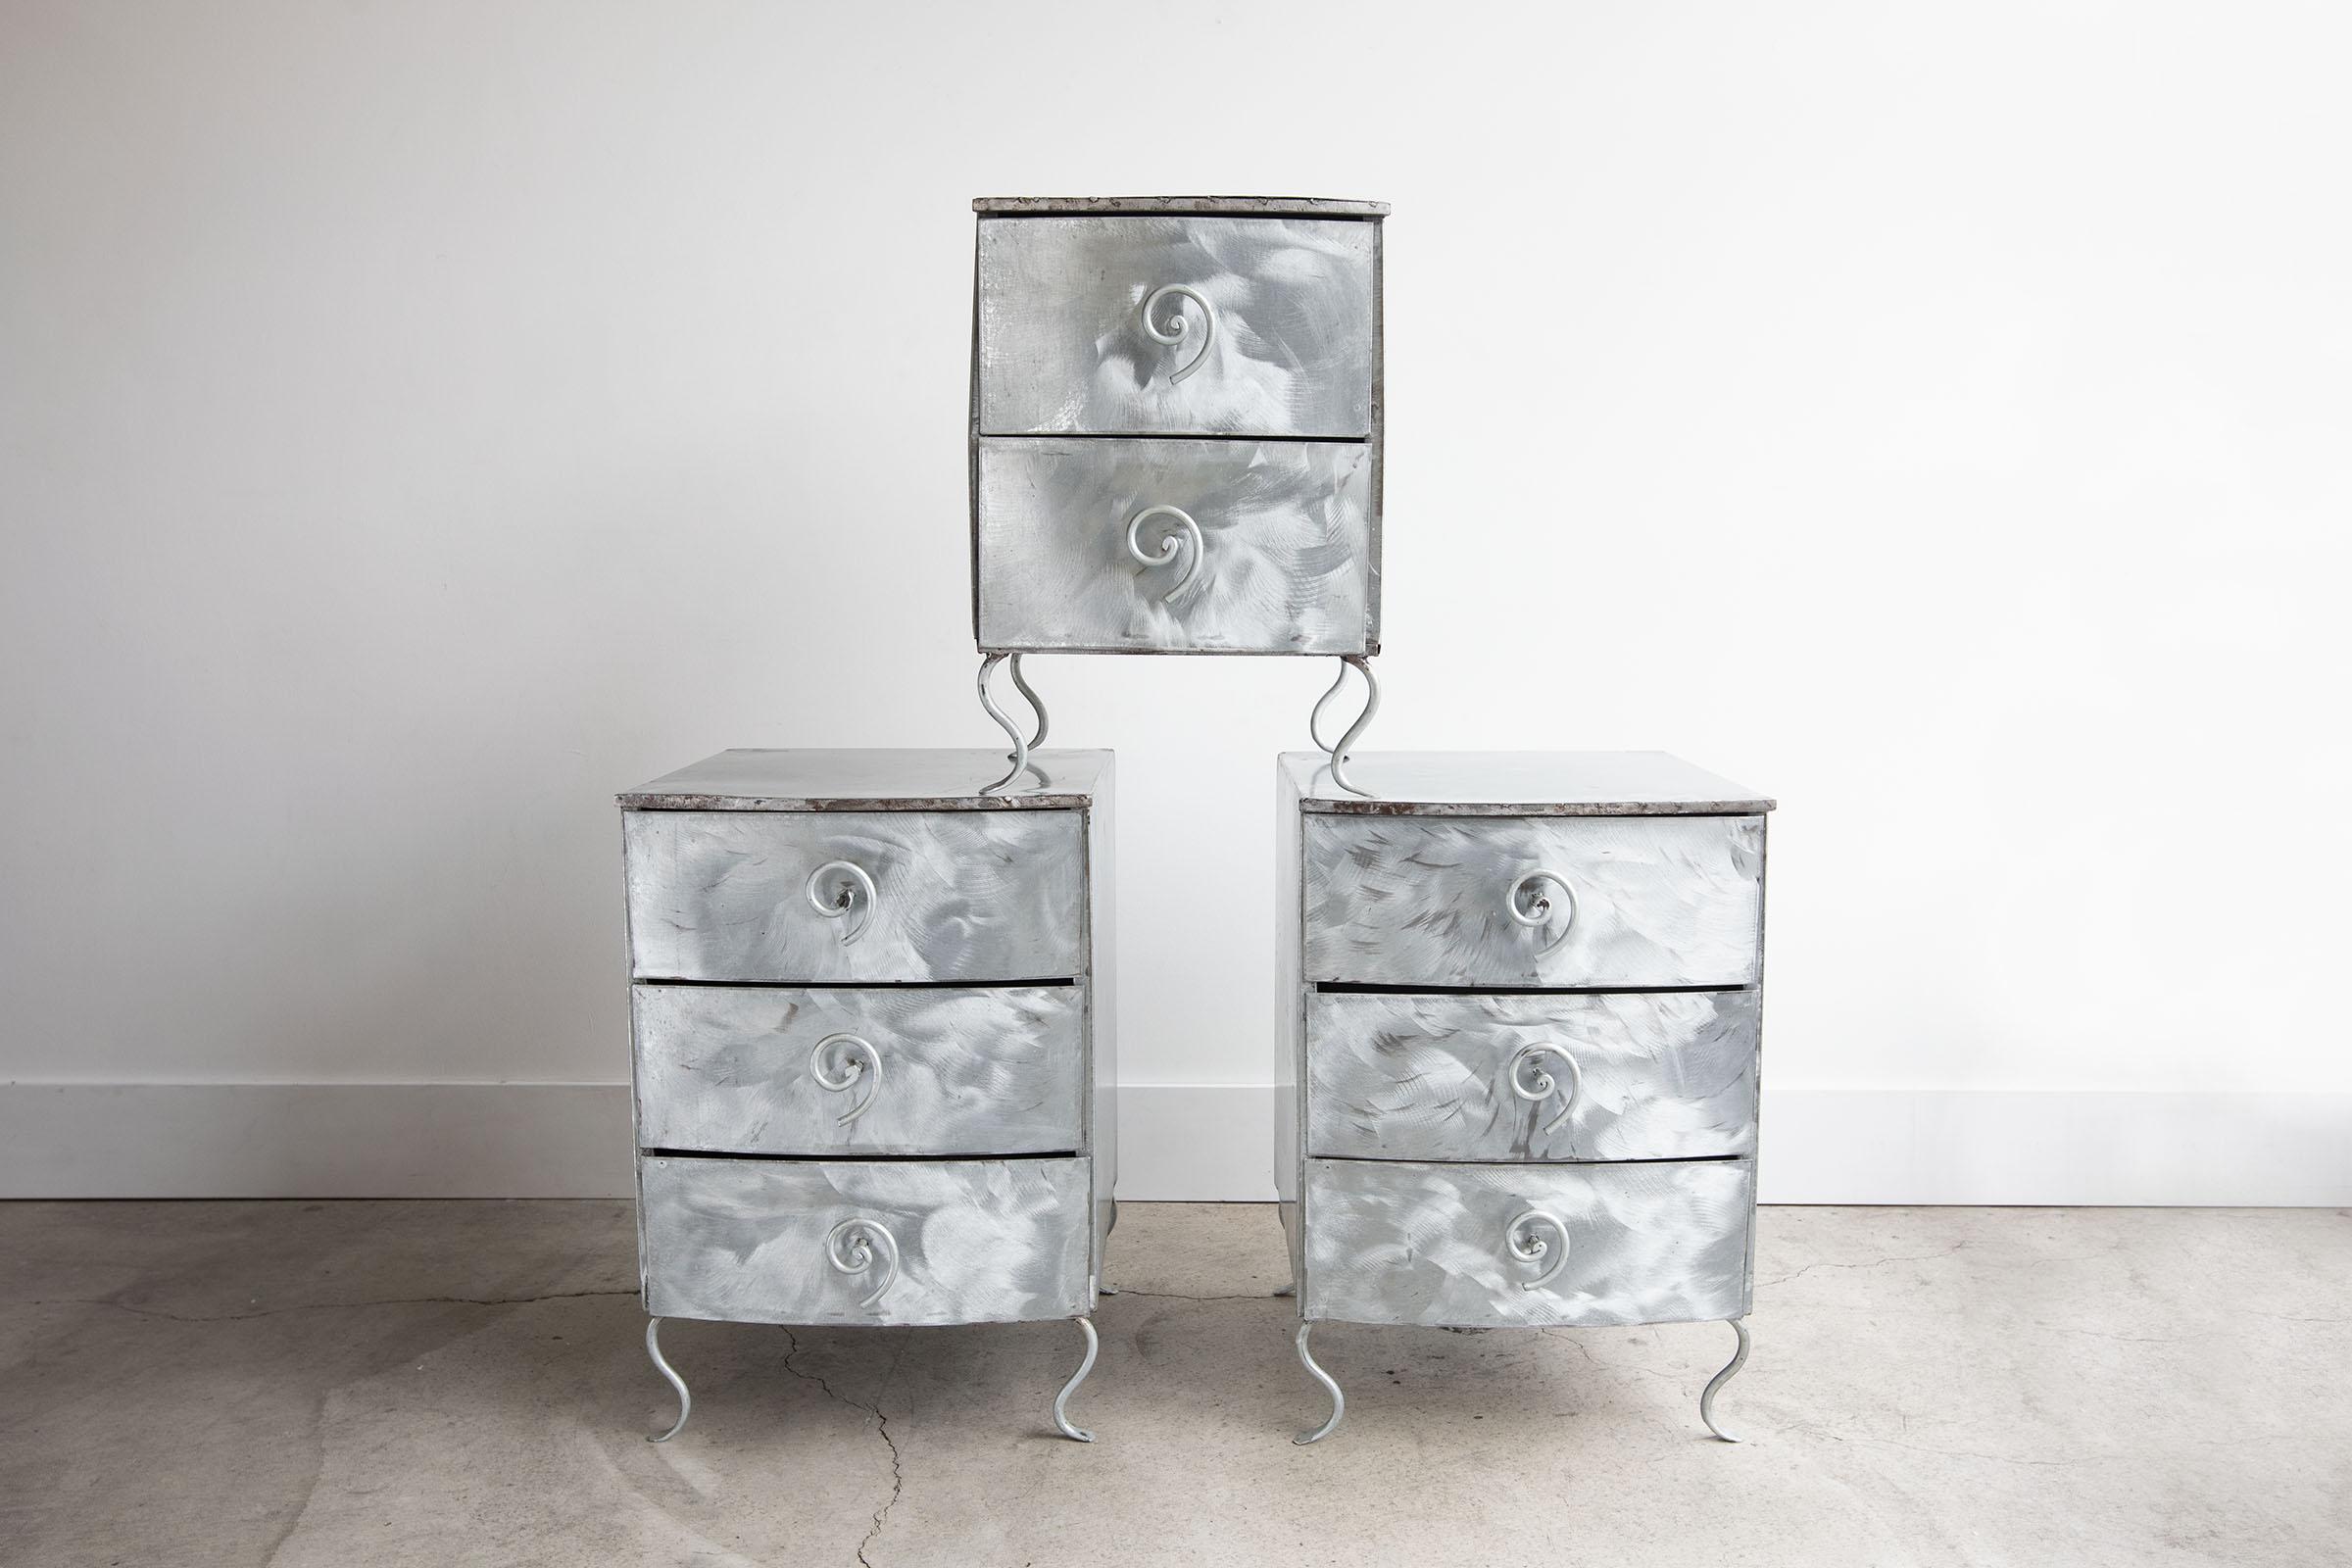 A stunning example of 1980s Postmodern Memphis design. Three handmade blushed aluminum nightstands or end-tables with swirl drawer pulls. The maker of these is unknown but they're handmade and are very special. Would be amazing in any setting. Great